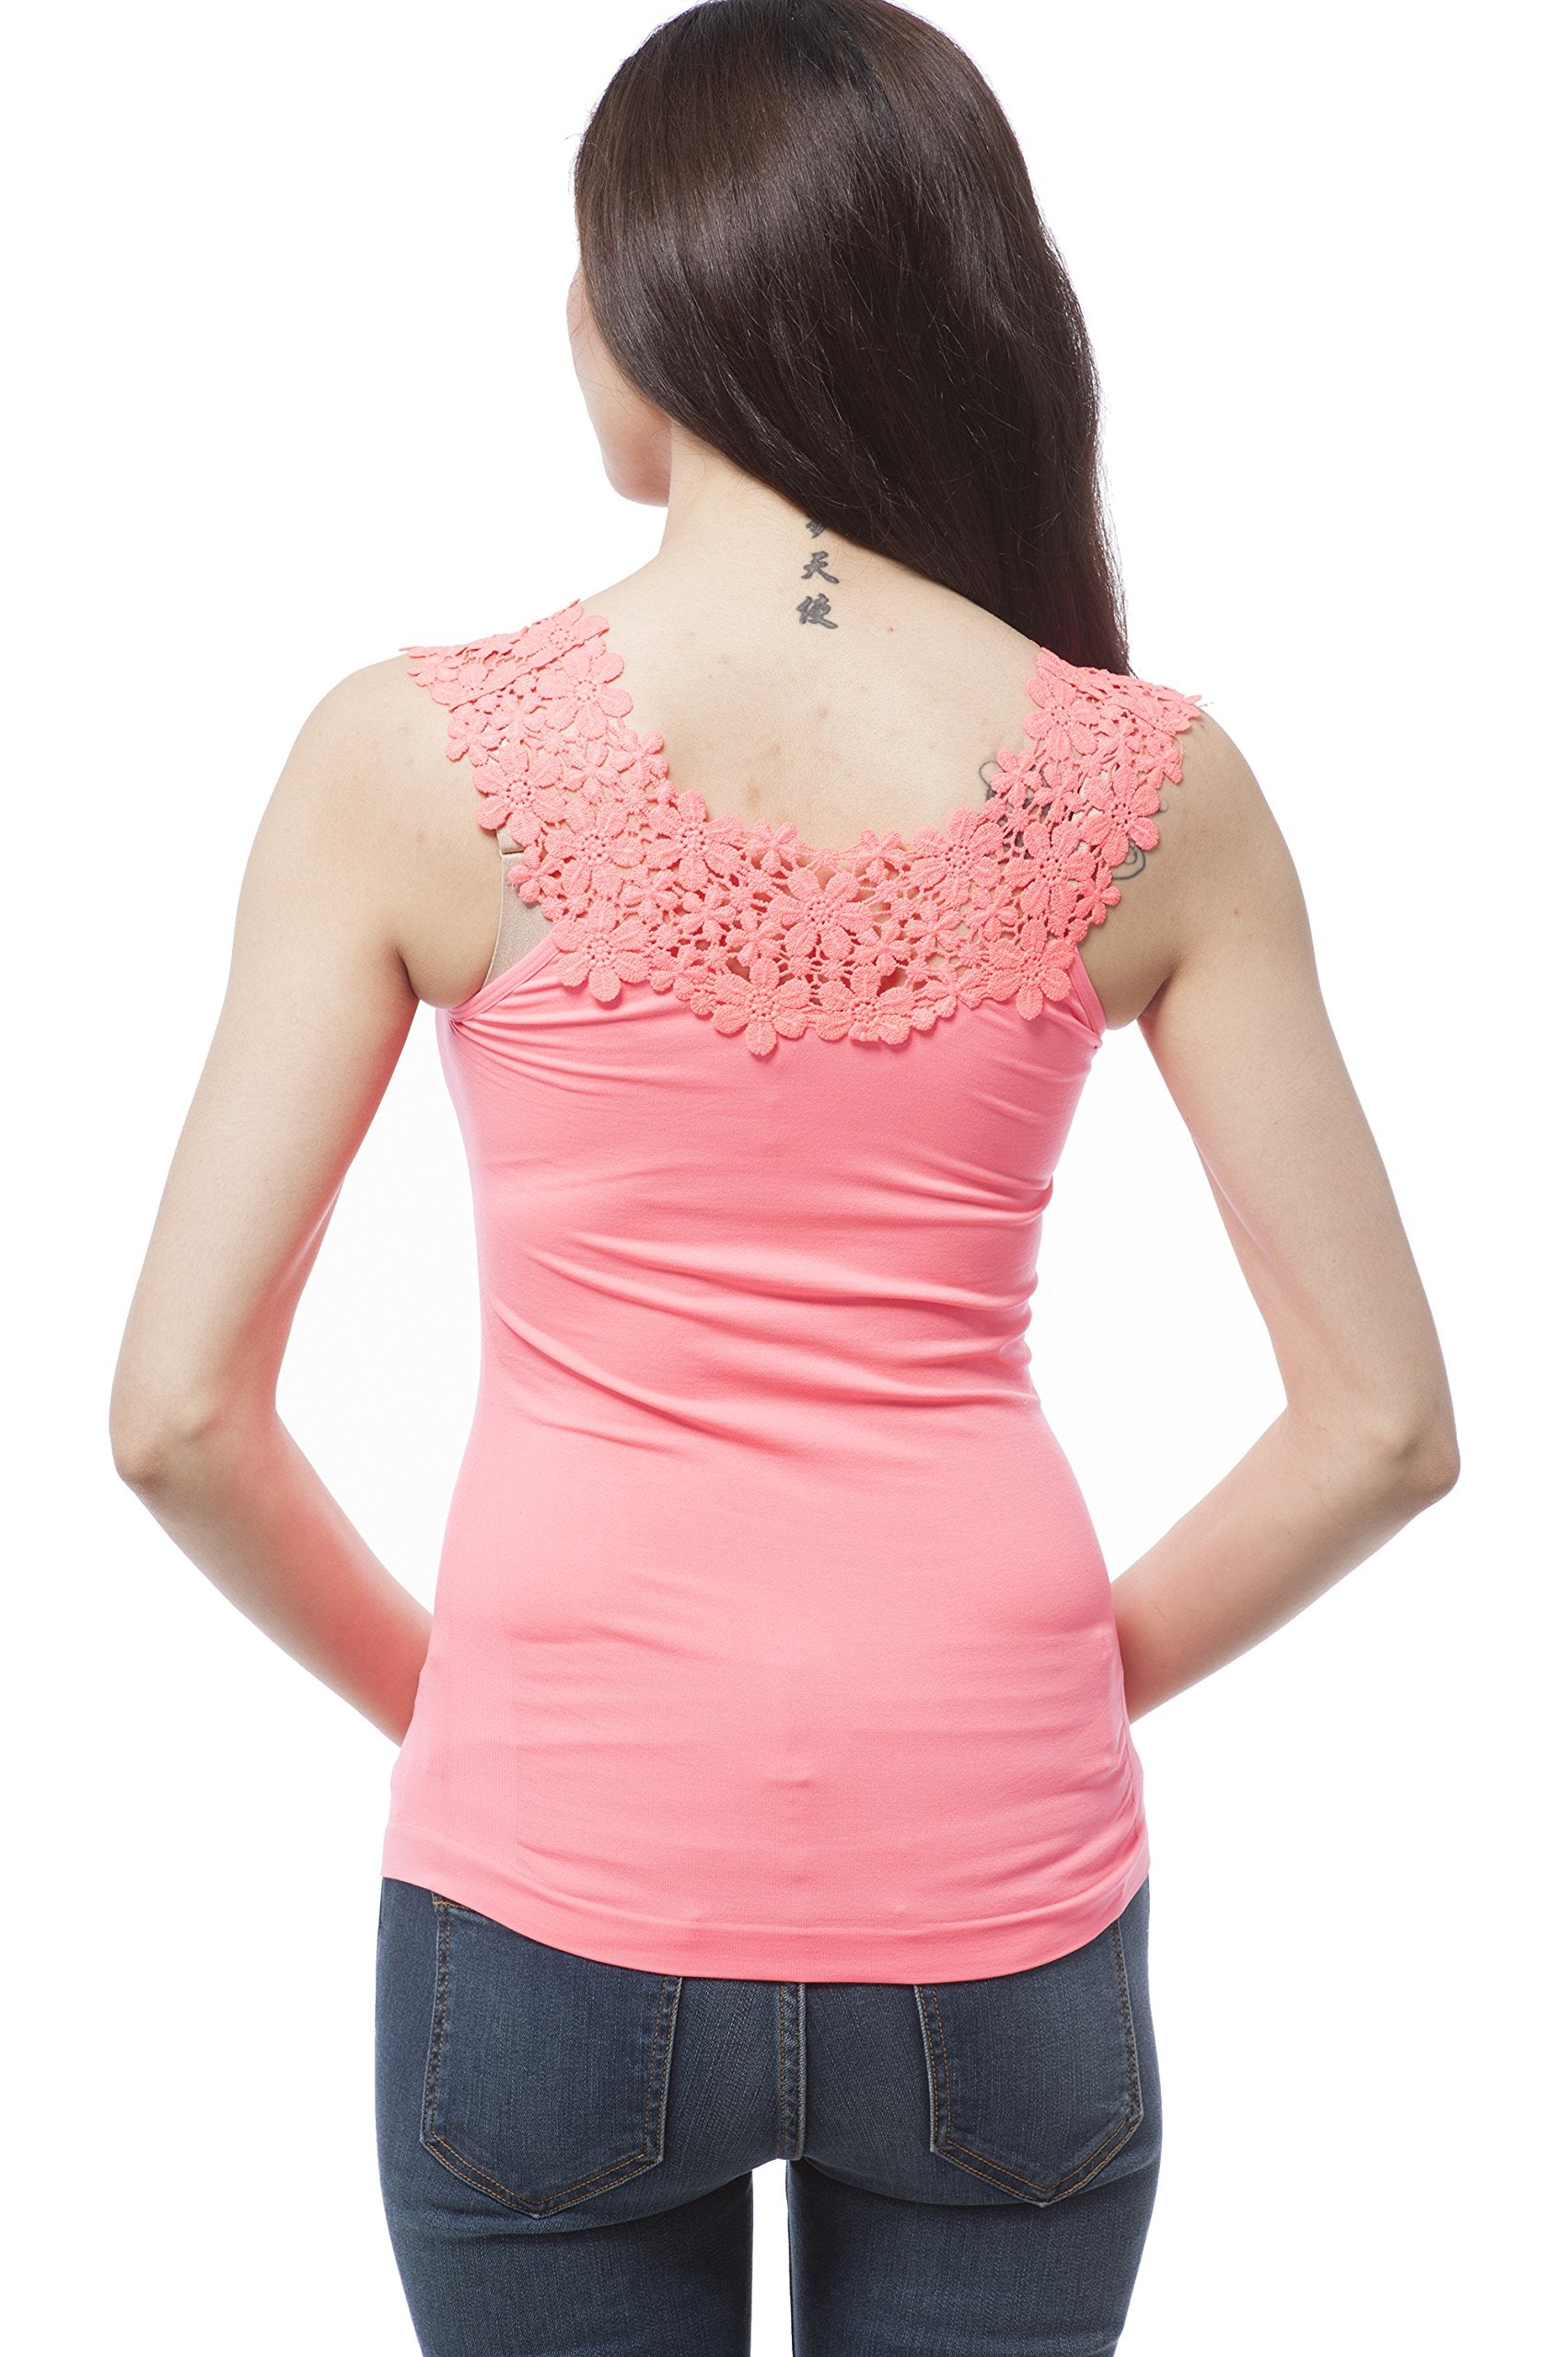 Hollywood Star Fashion Plain One Size Lace Trim On Top With Ribbed Sides